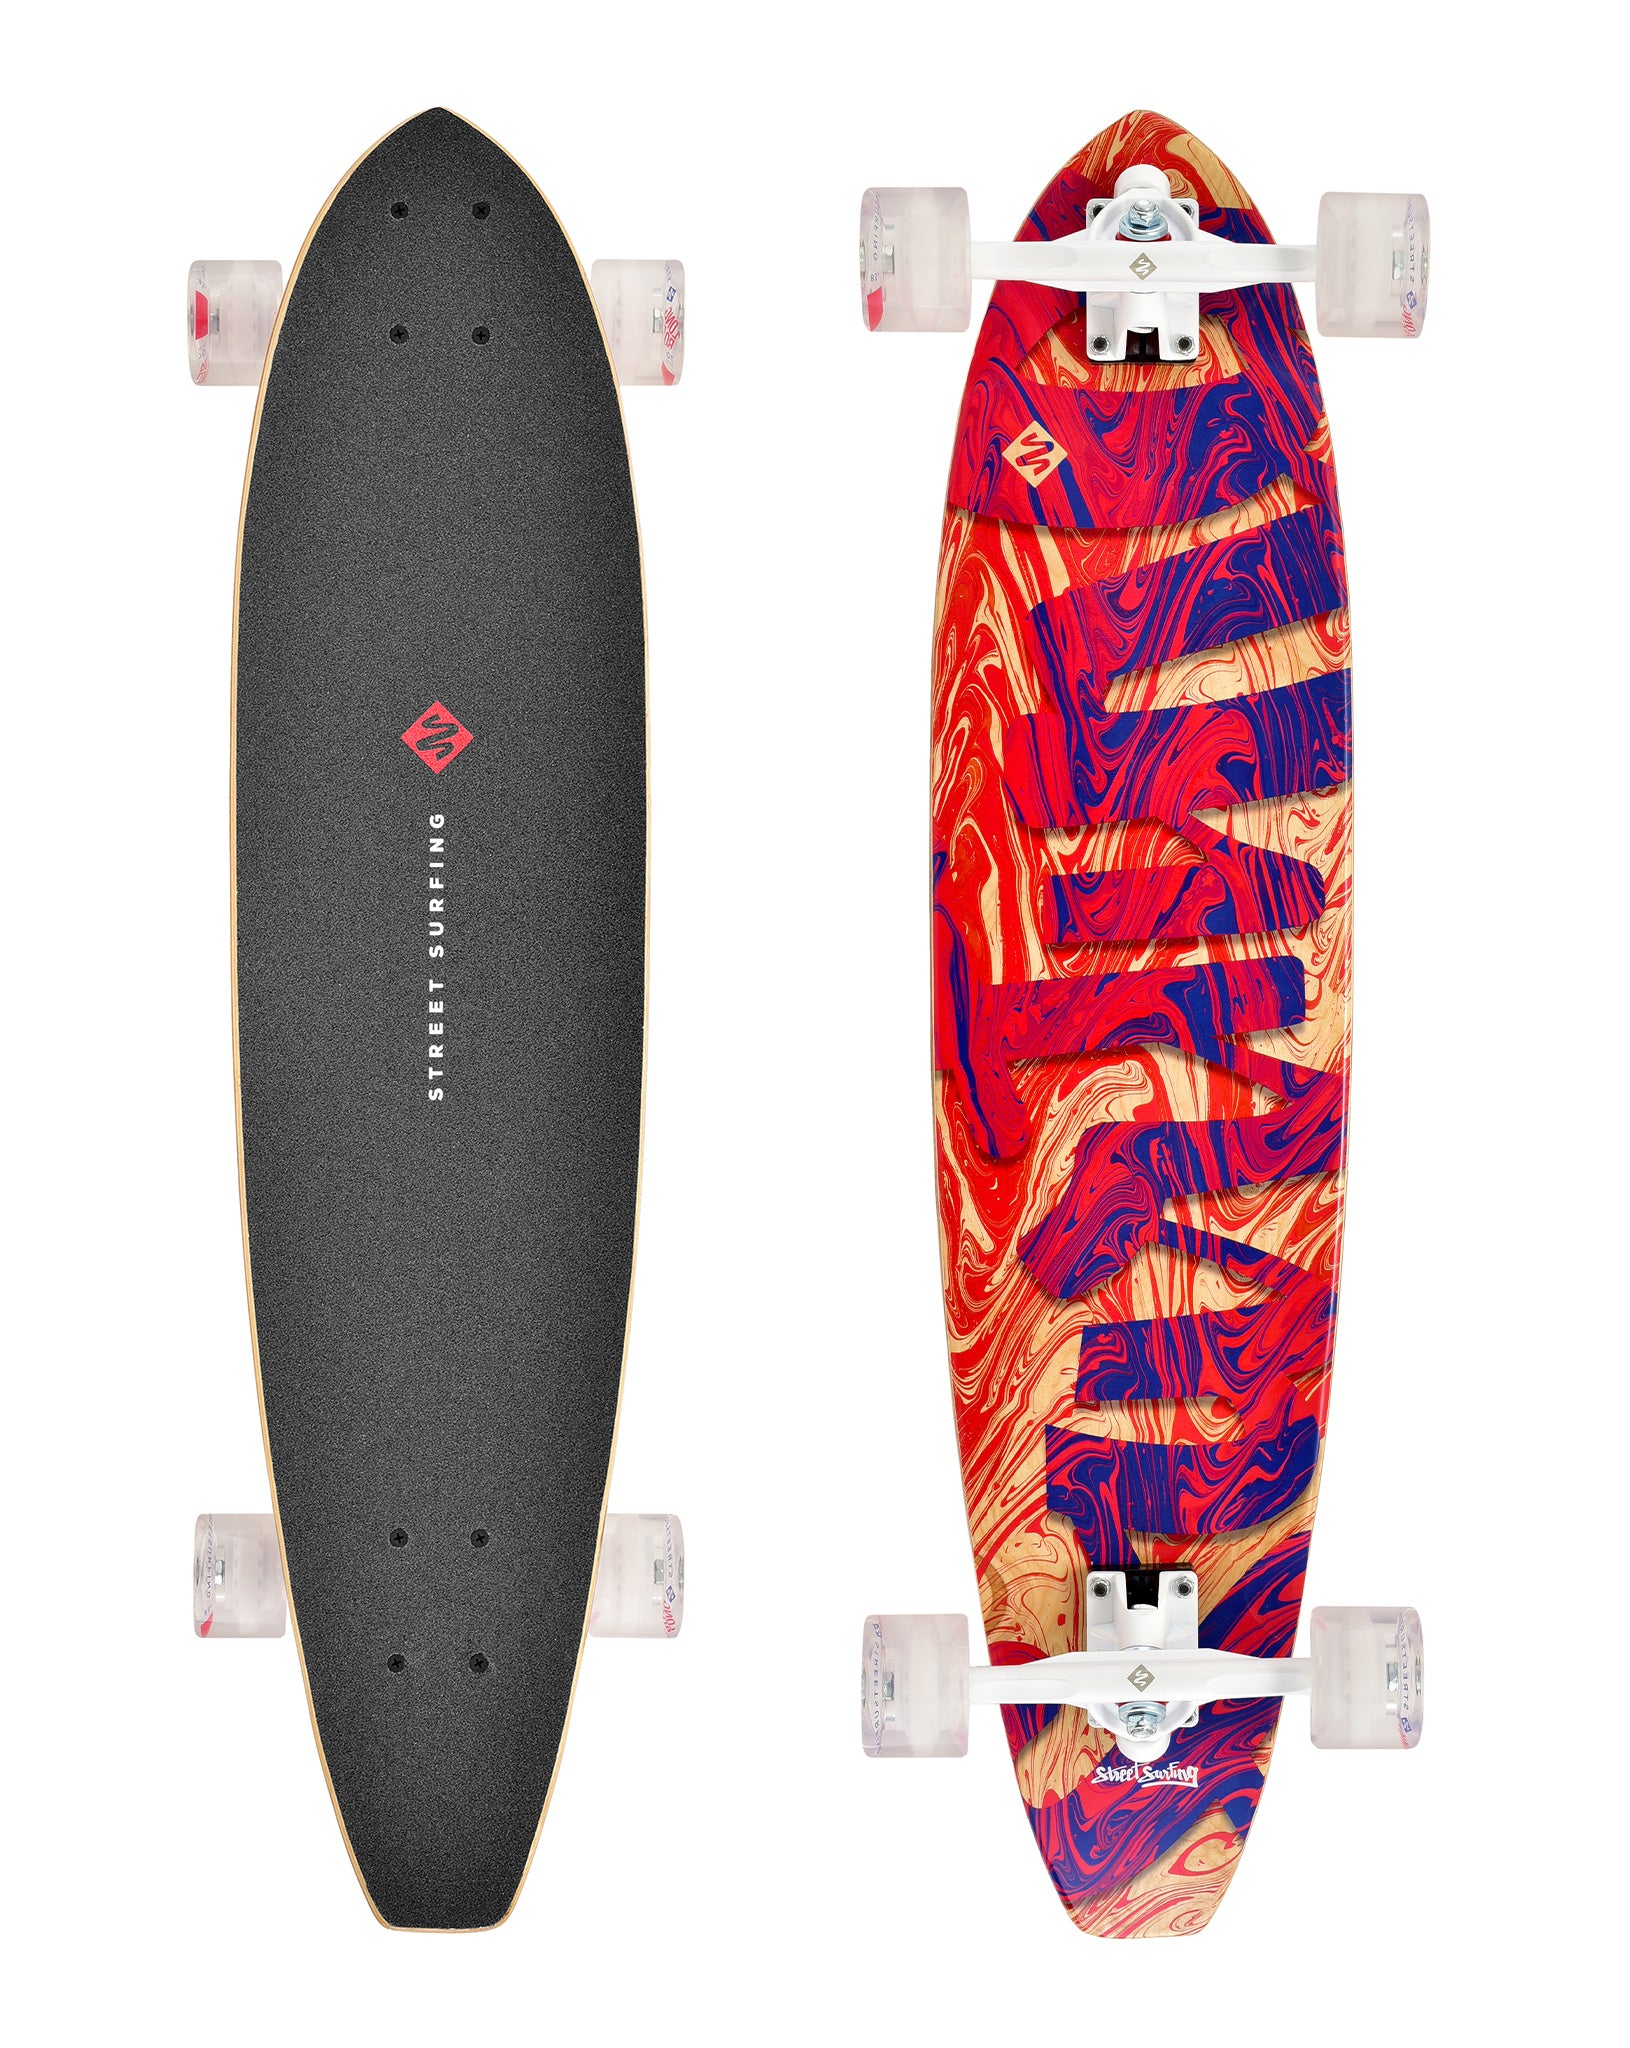 Street Surfing Streaming cut kicktail 36" Longboard Photo product